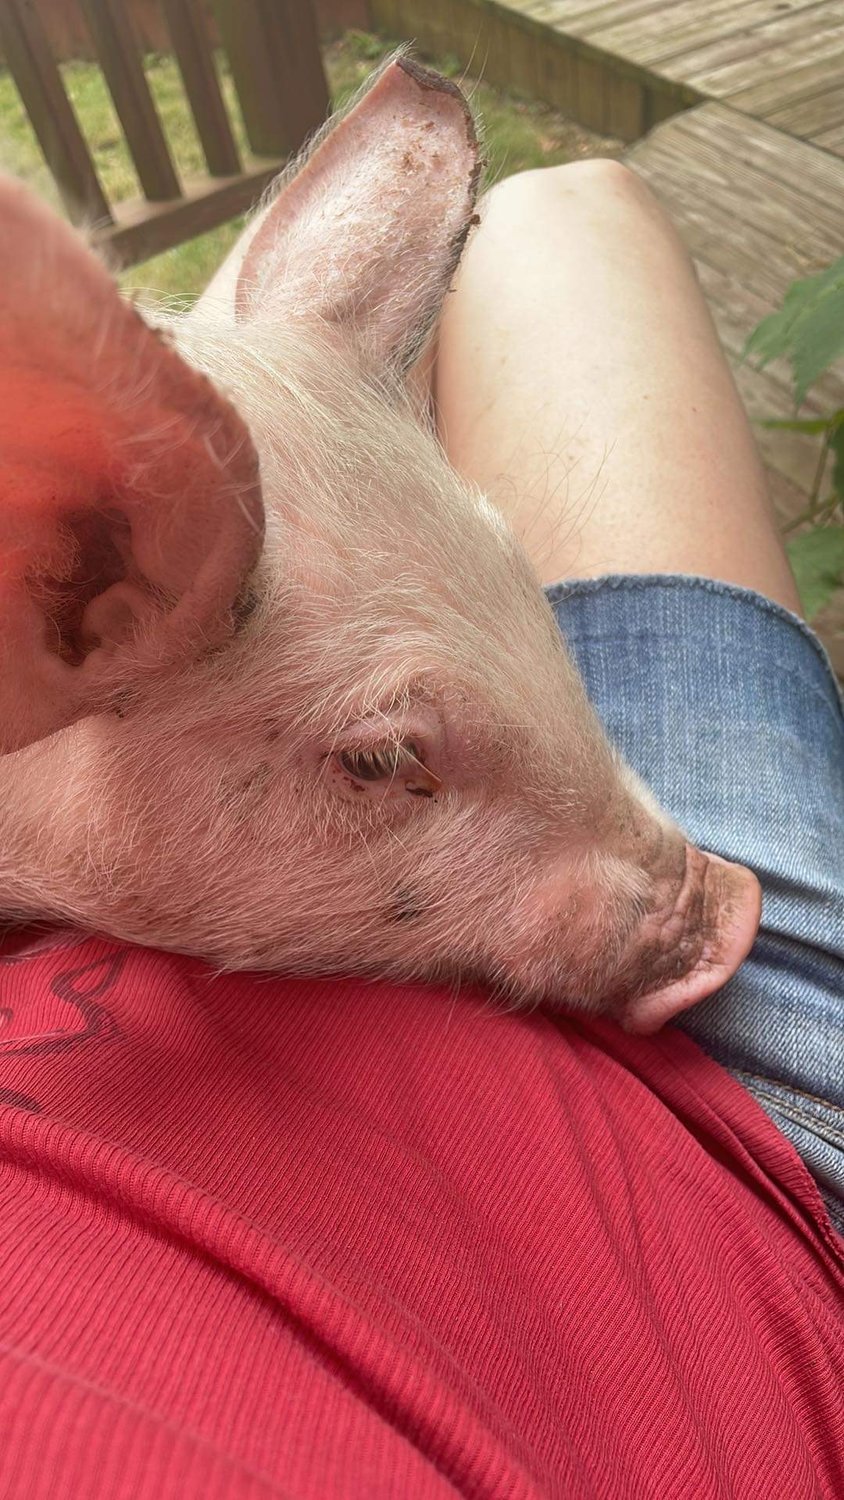 Howard, who will eventually grow to 800 pounds or so, quickly came to trust his rescuers, and bonded with Stracher.